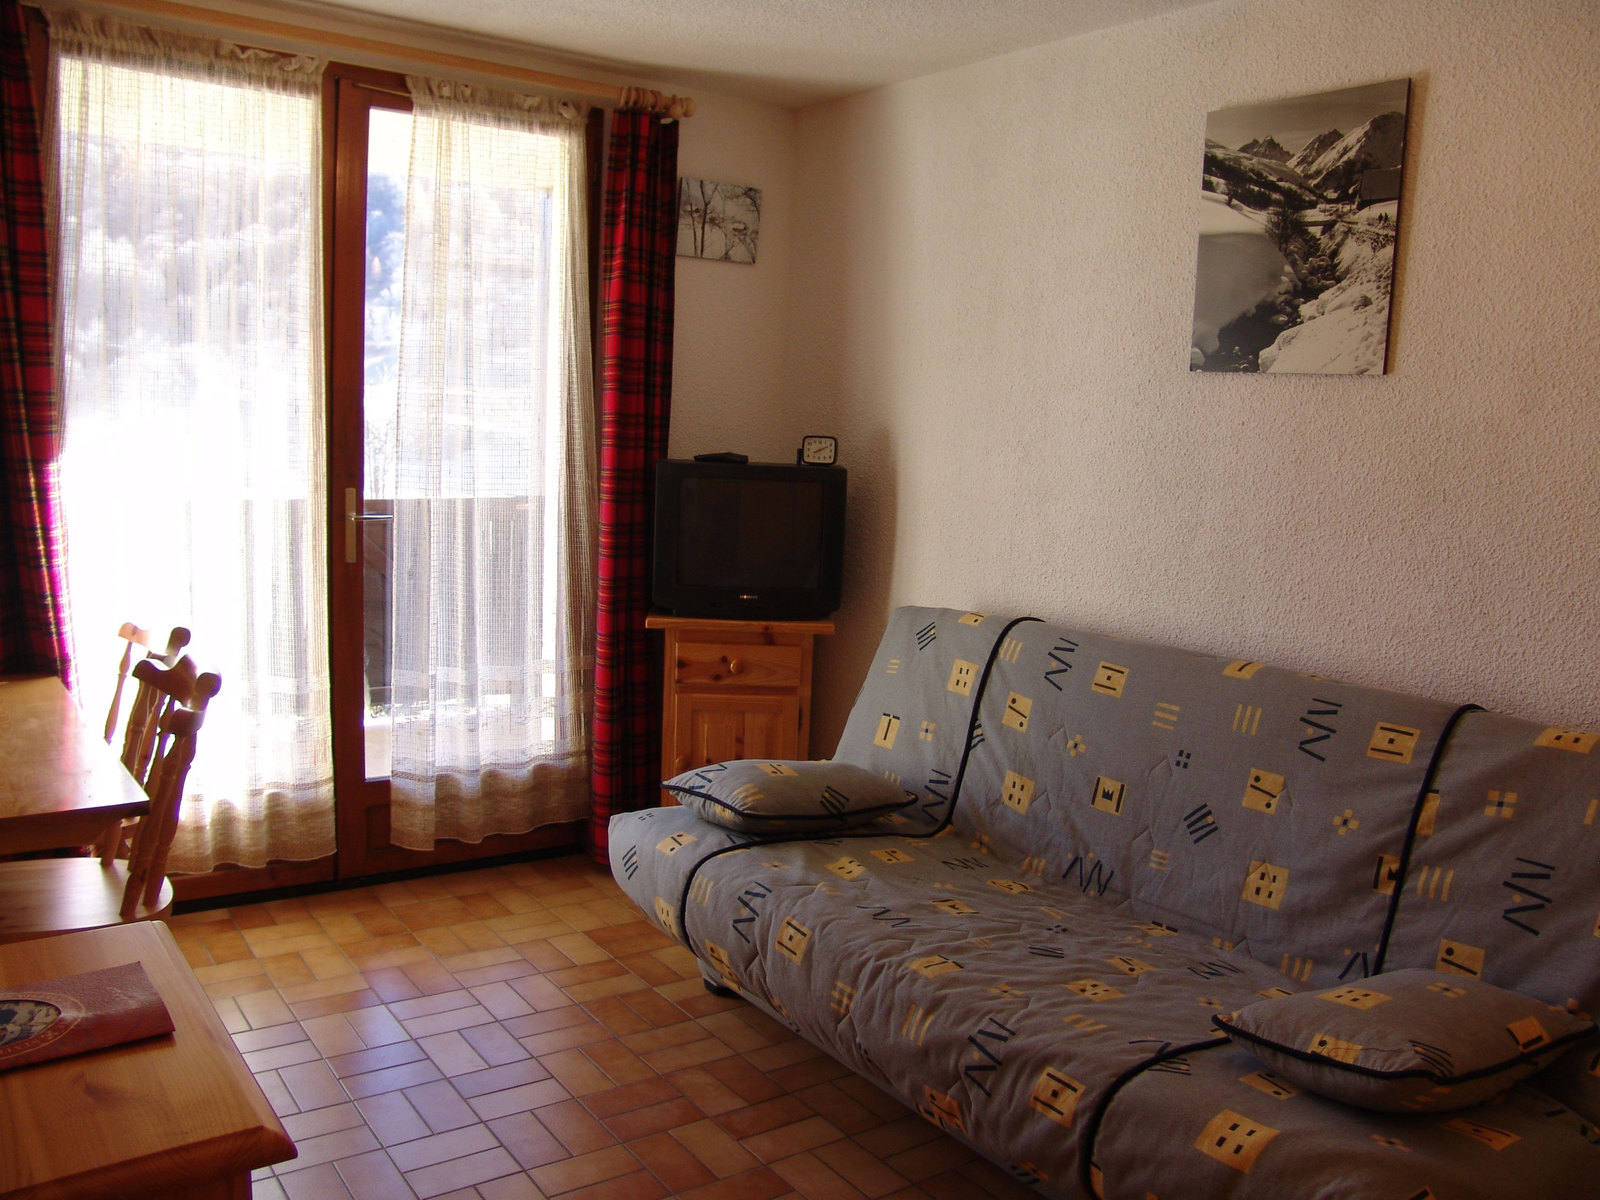 Studio 4 Persons Classic - Apartments Verneys Galibiers - Valloire